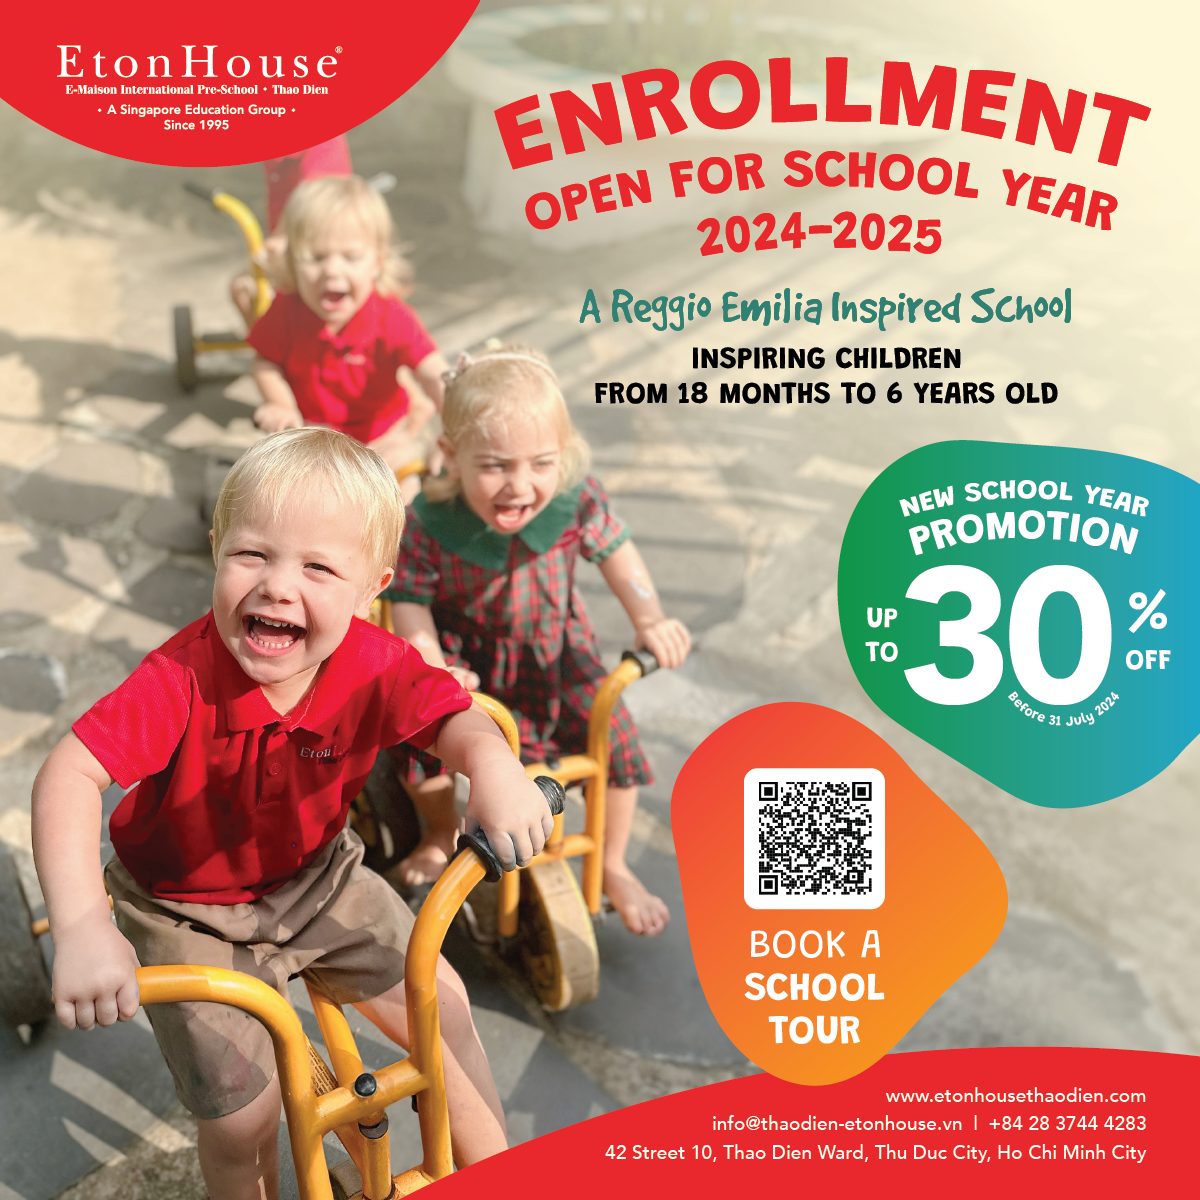 ETONHOUSE PROMOTION UP TO 30% OFF FOR THE NEW SCHOOL YEAR 2024-2025